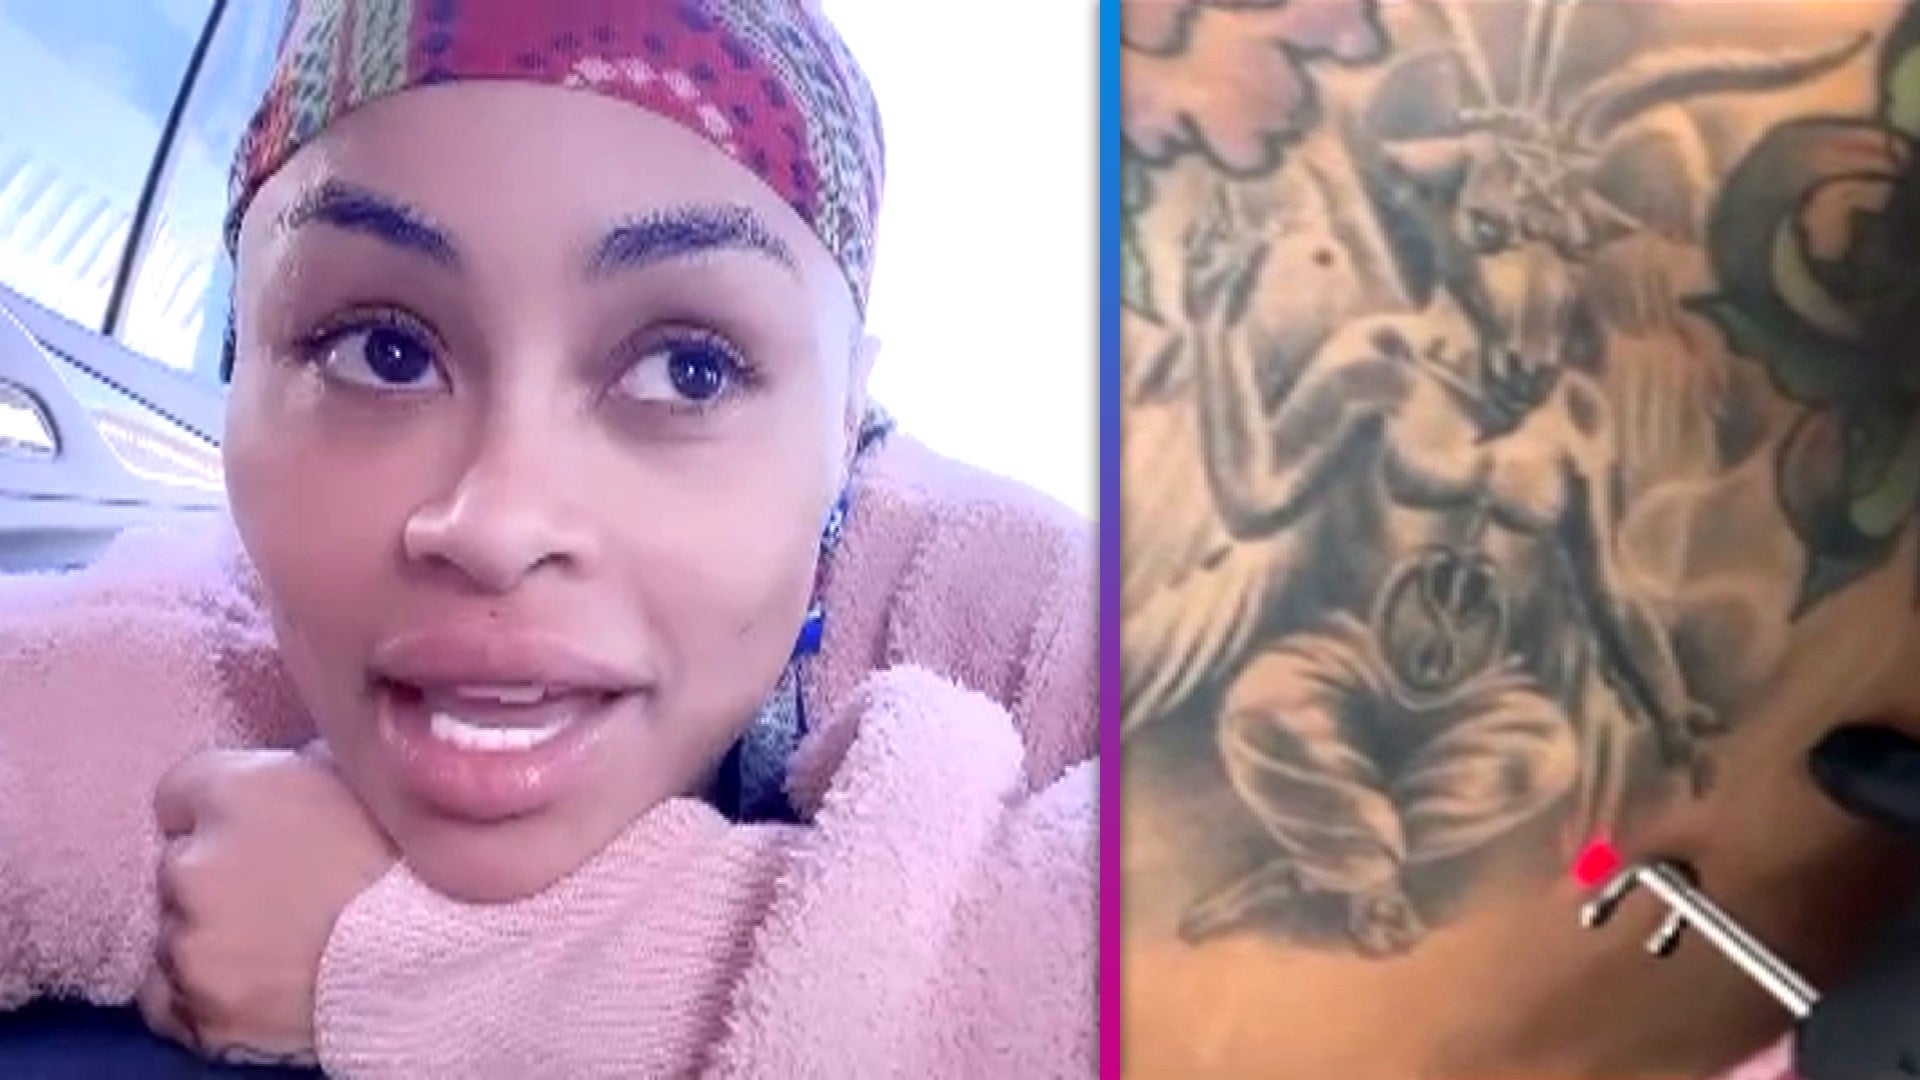 Blac Chyna gets kids names tattooed on her hand  8days